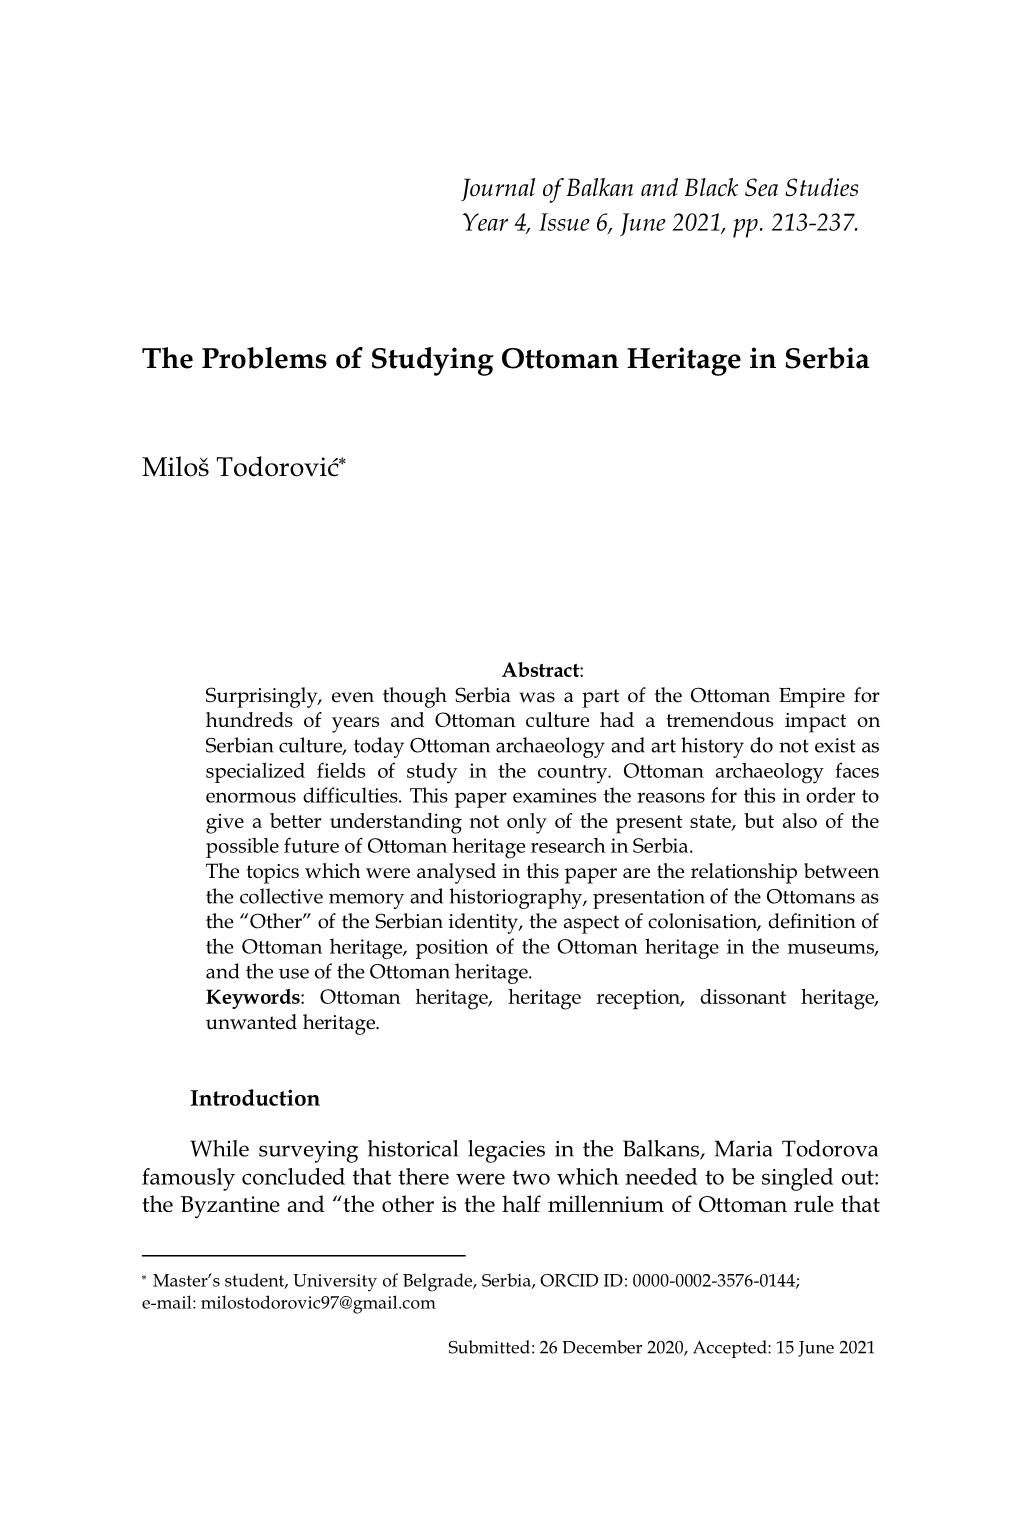 The Problems of Studying Ottoman Heritage in Serbia